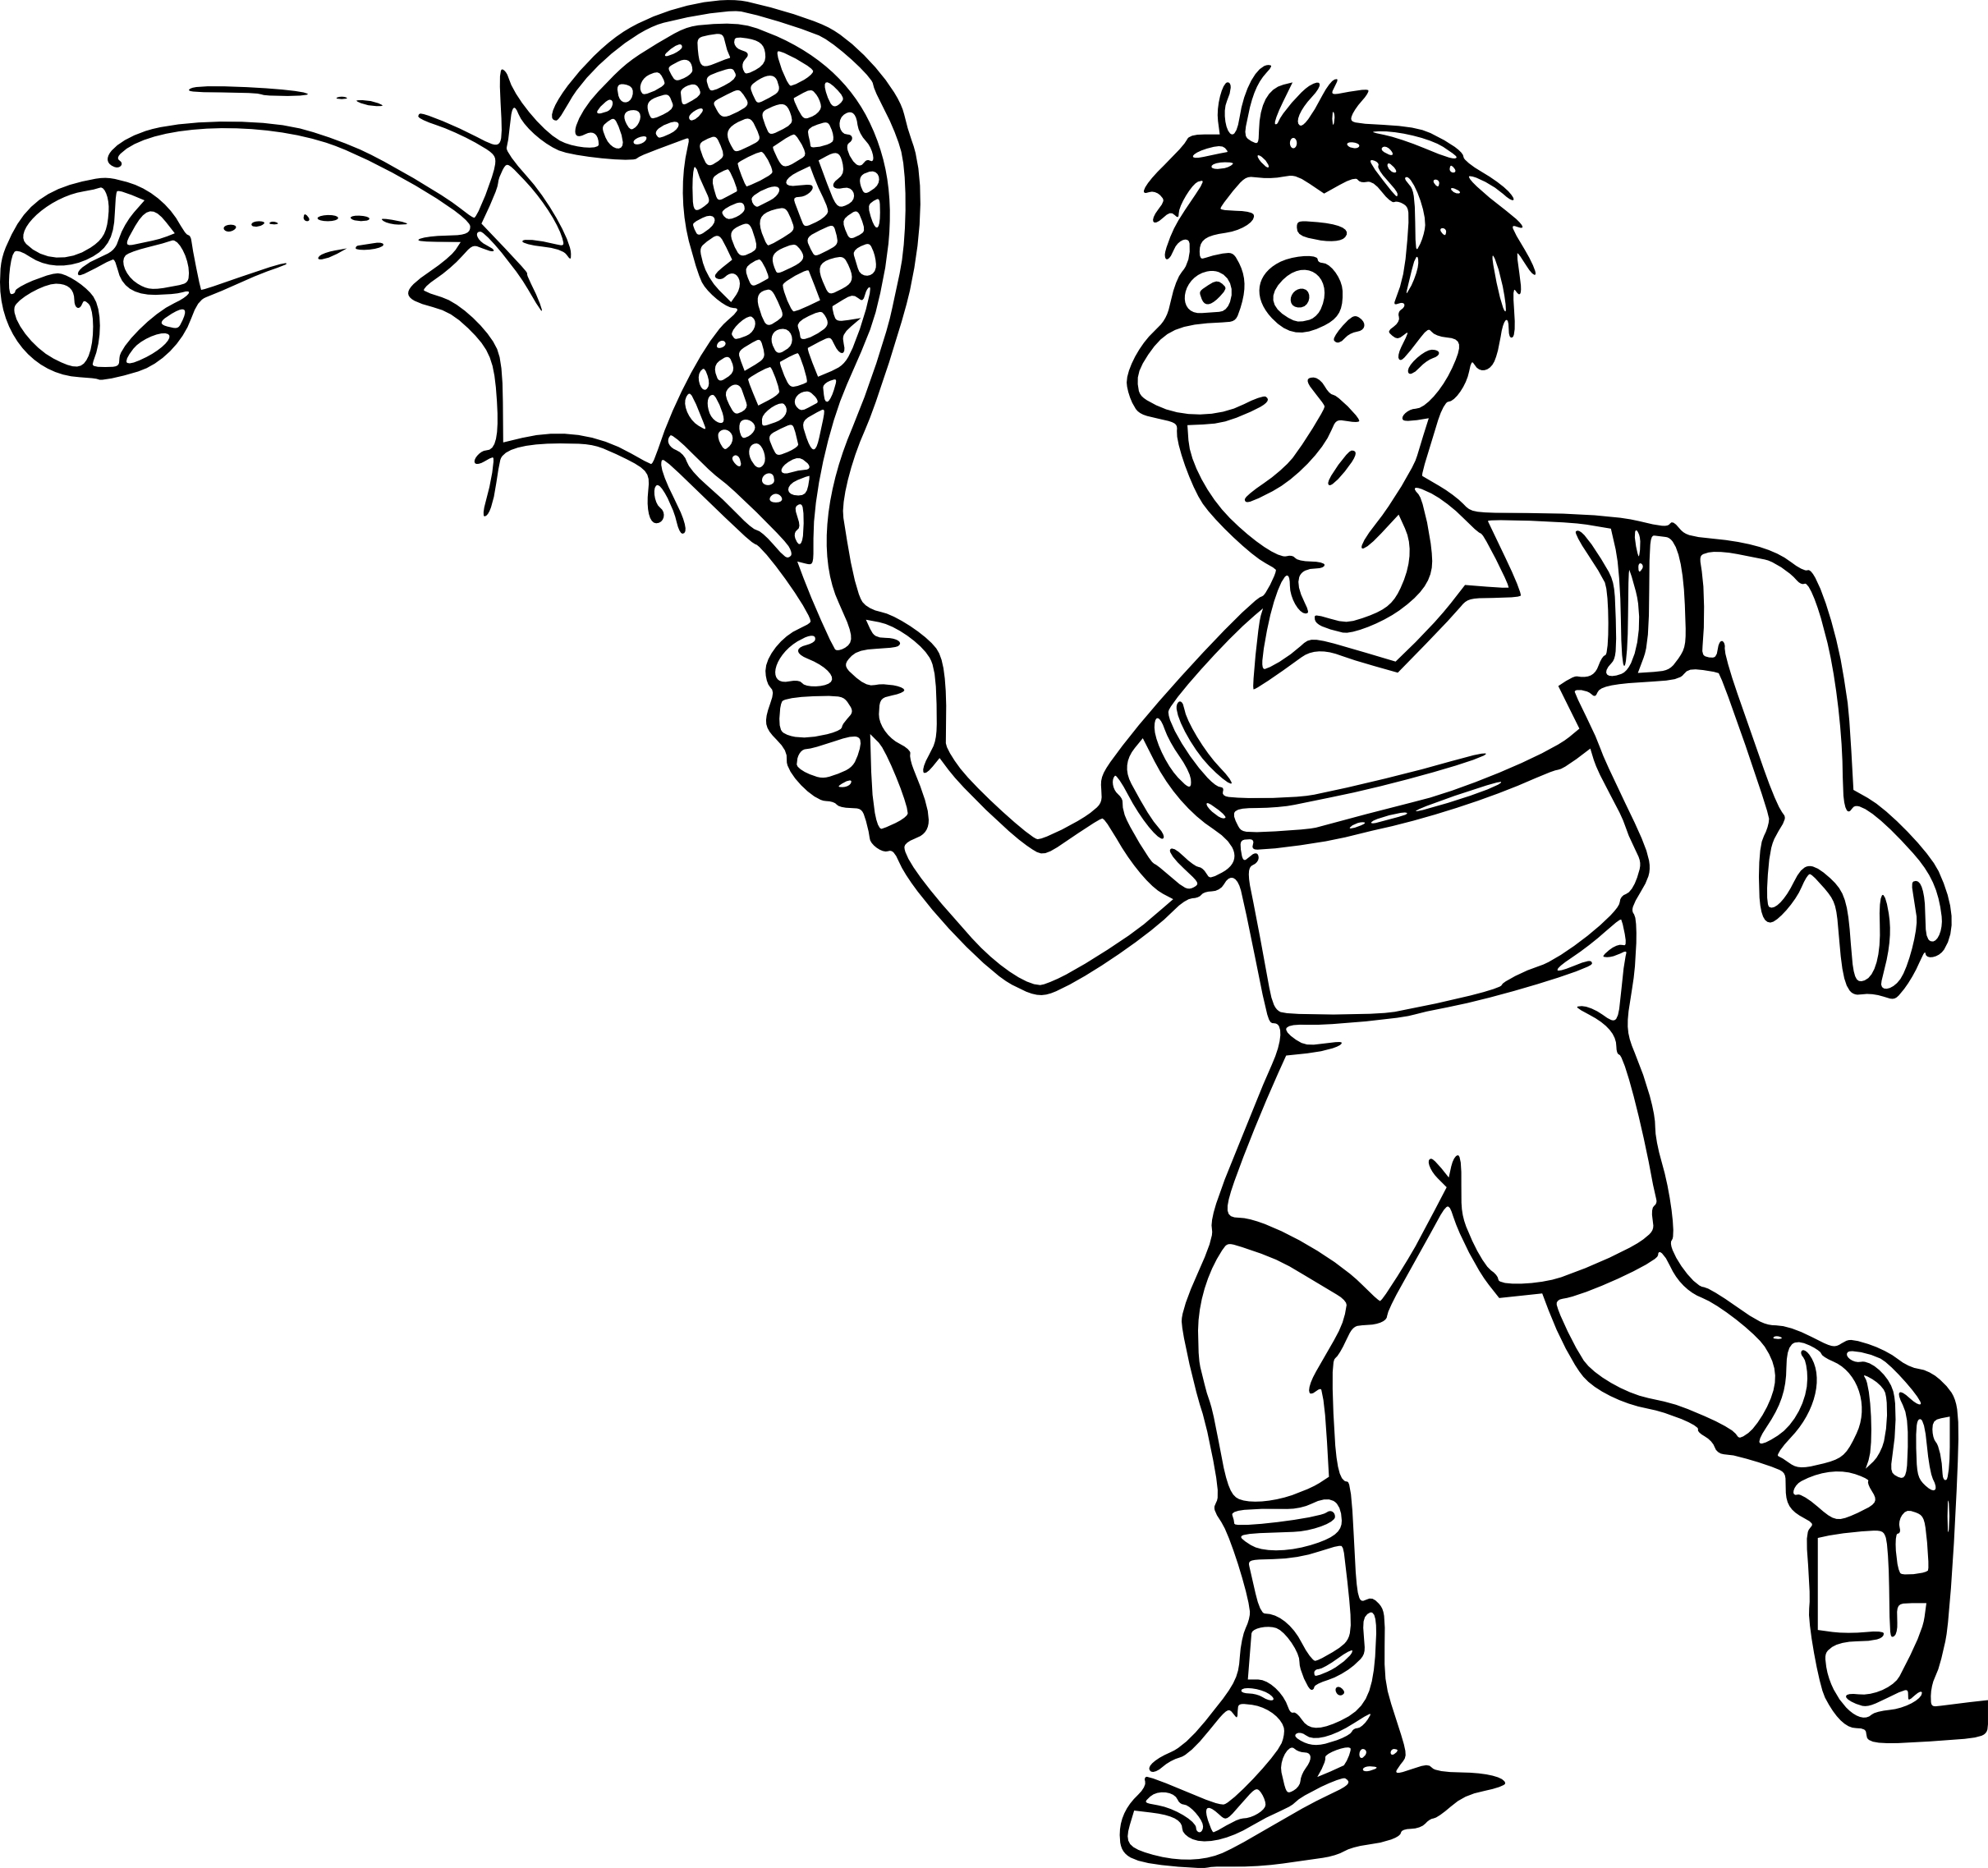 Tennis drawing and coloring page